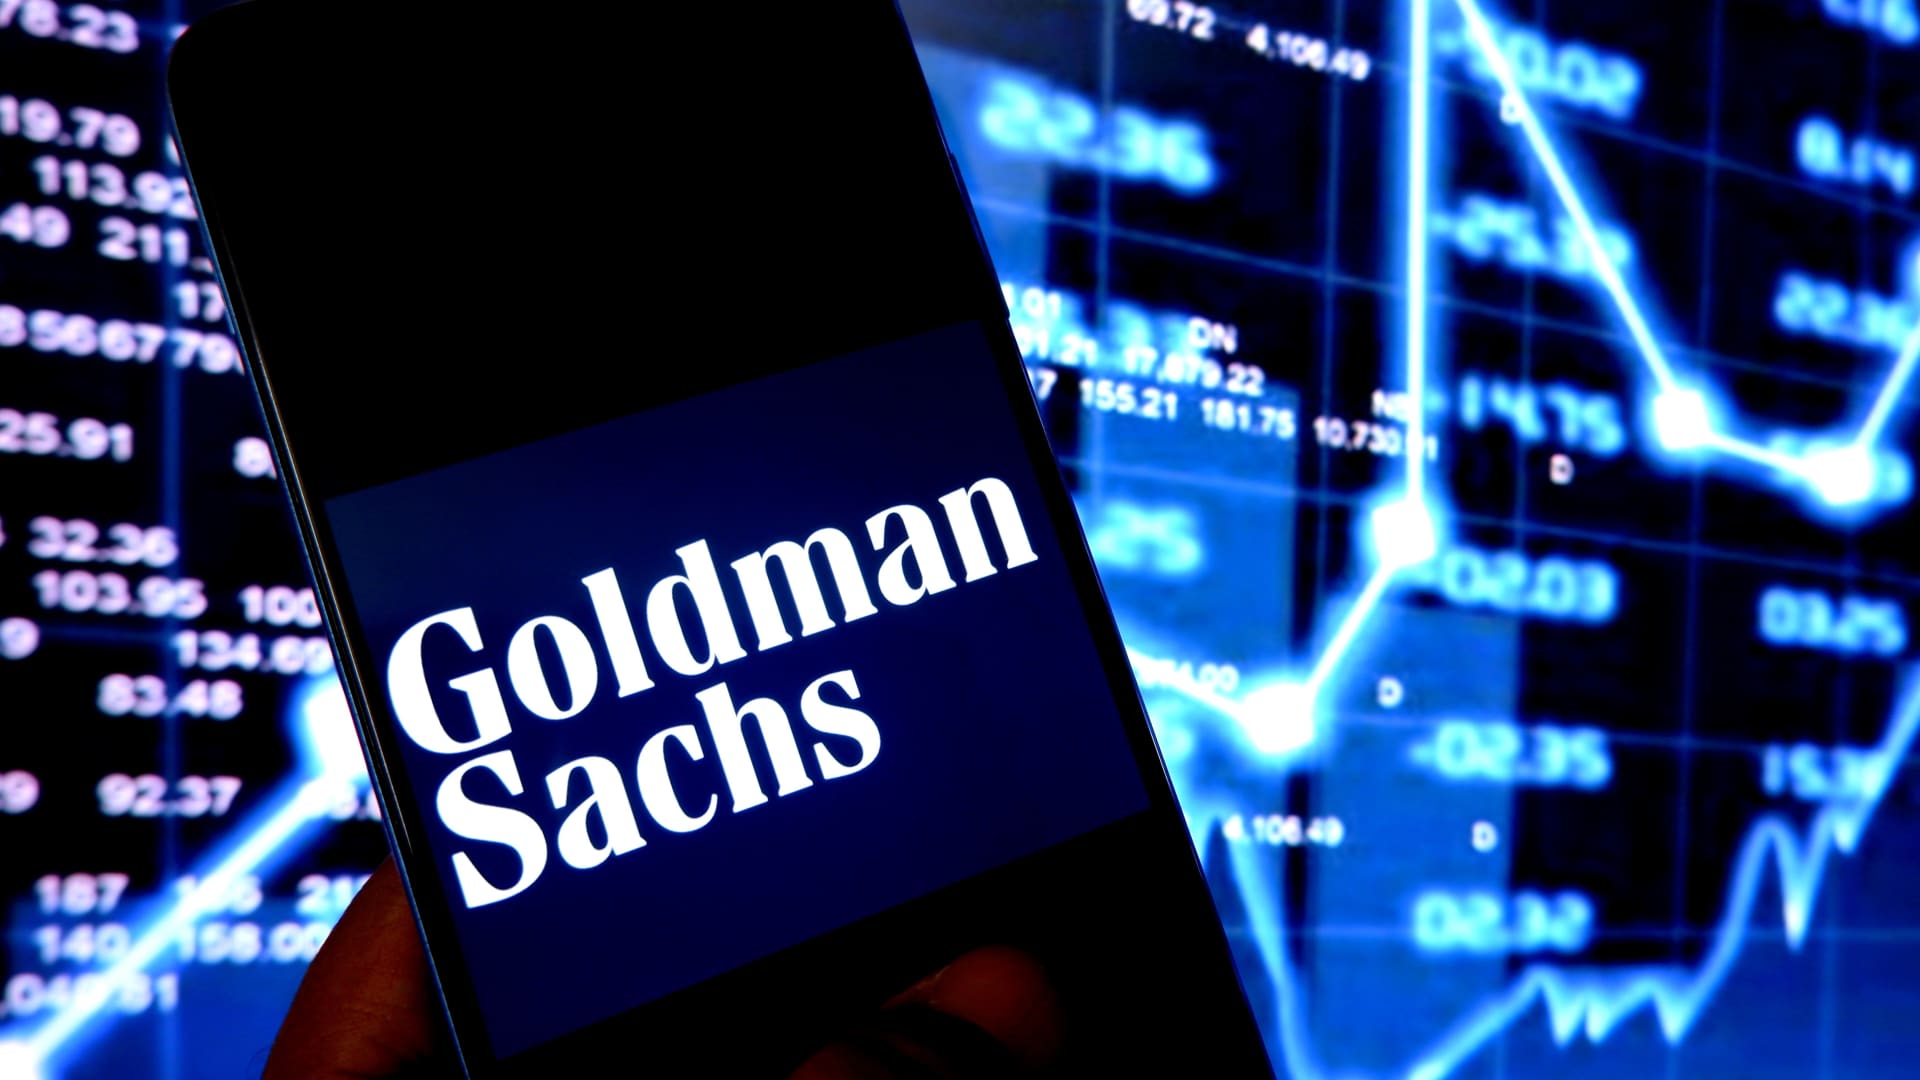 Goldman’s list of top picks to buy right now includes these 6 Asian stocks